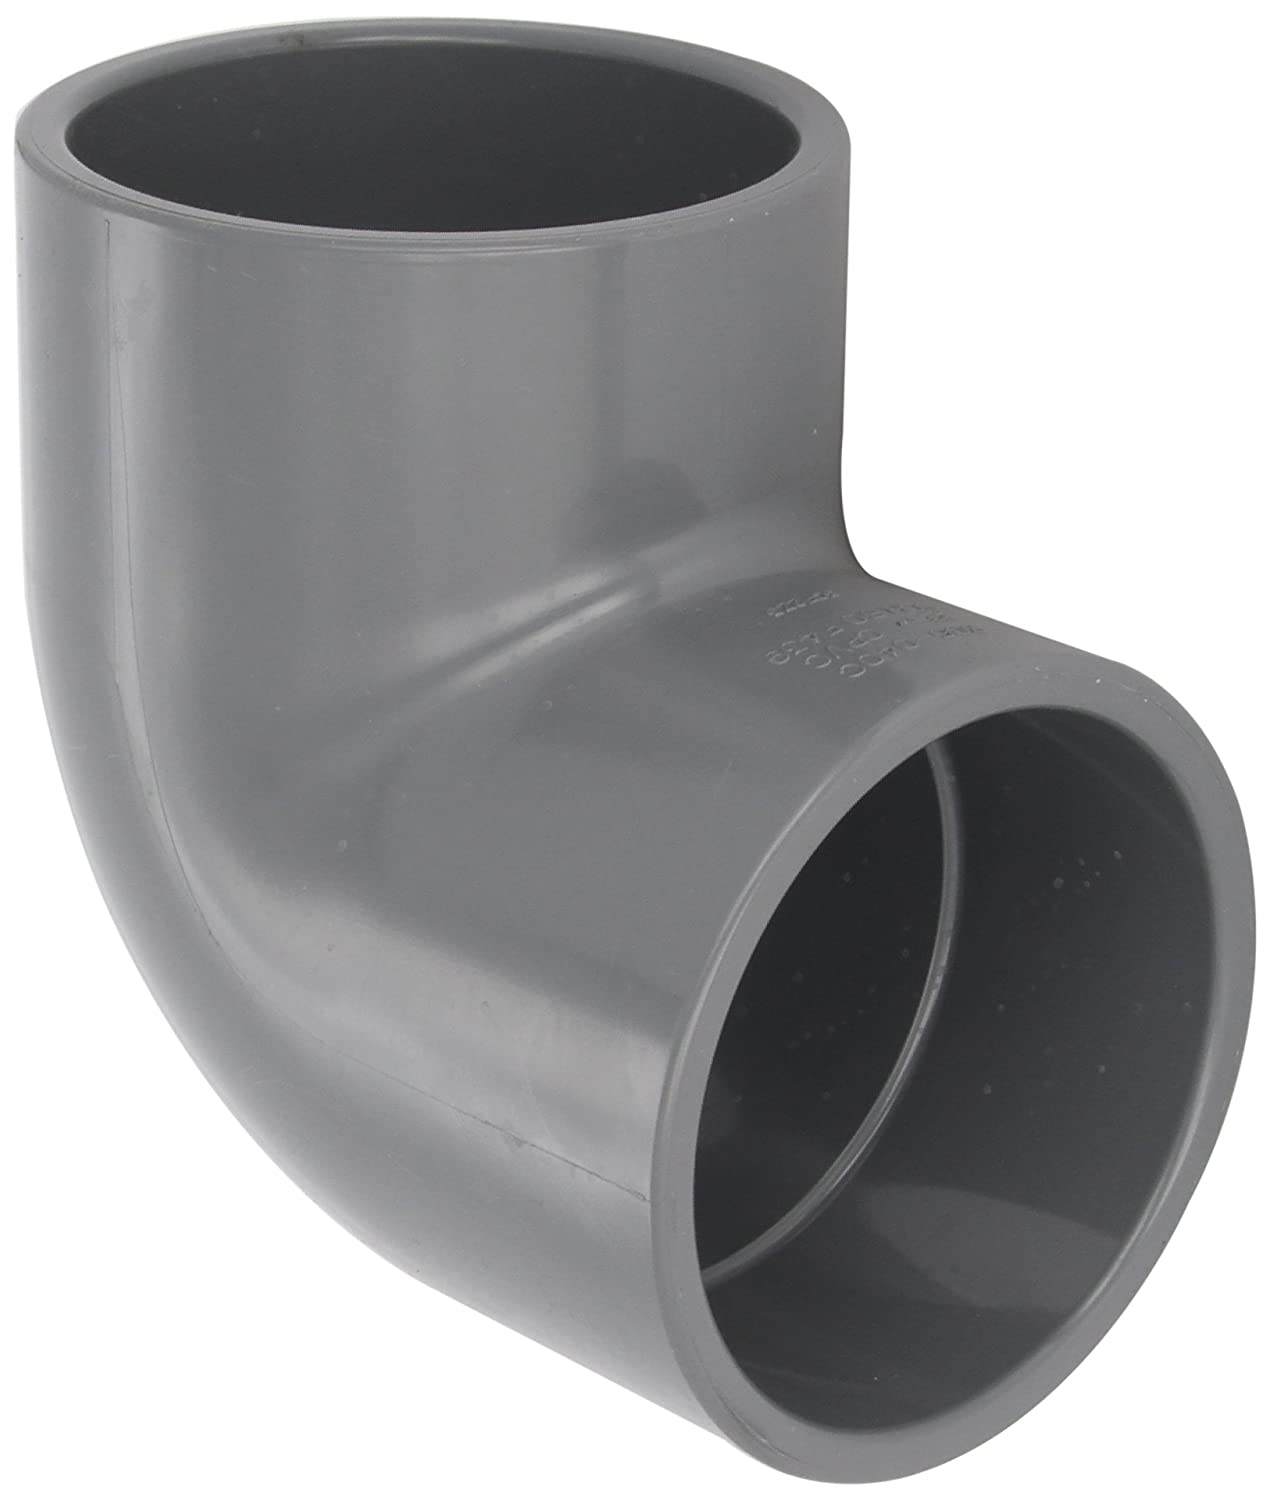 Spears 806-007C - CPVC Pipe Fitting, 90 Degree Elbow, Schedule 80, 3/4" Socket